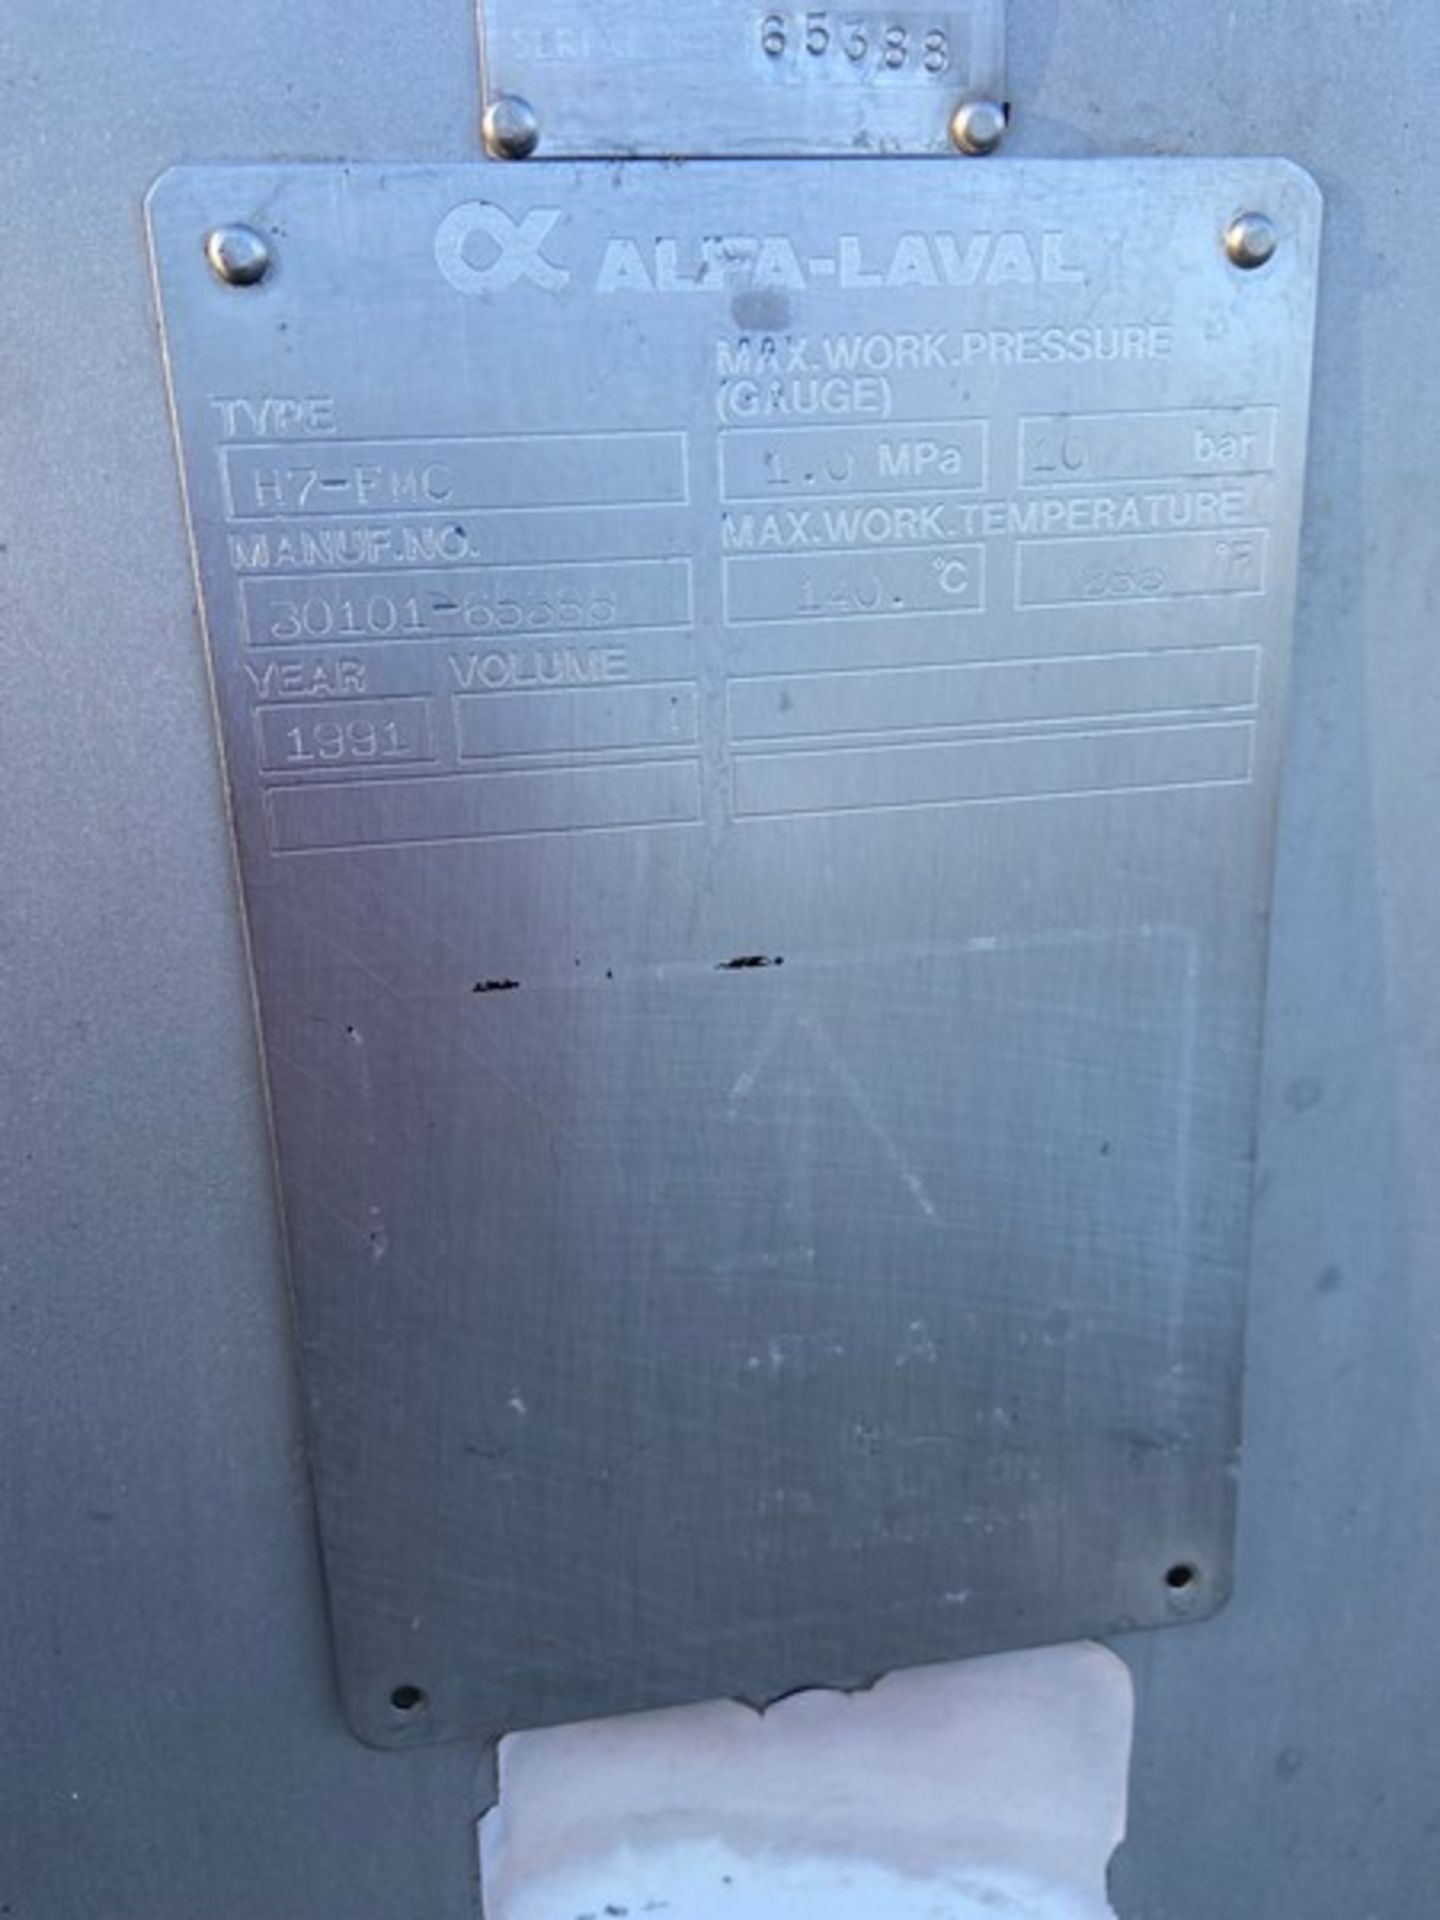 Alfa-Laval 1-Section Plate Press Heat Exchanger,Type H7-FMC, Manuf. No.: 30101-65388, Max. Work - Image 5 of 6